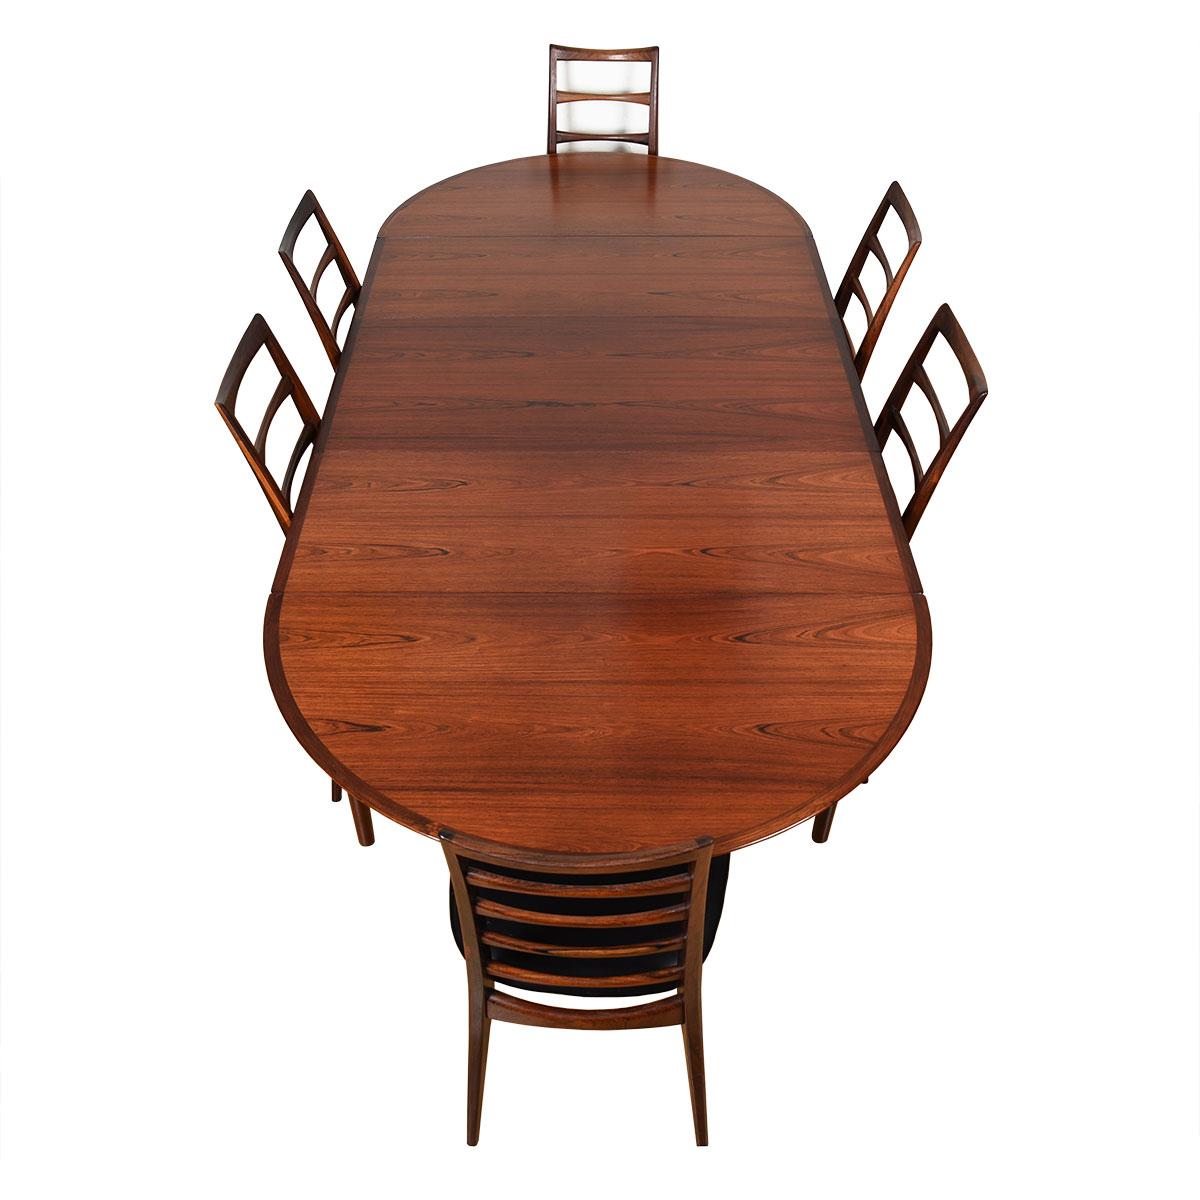 Vodder Danish Rosewood Dining Table with Removable Drop Leaves + Middle Leaf 1